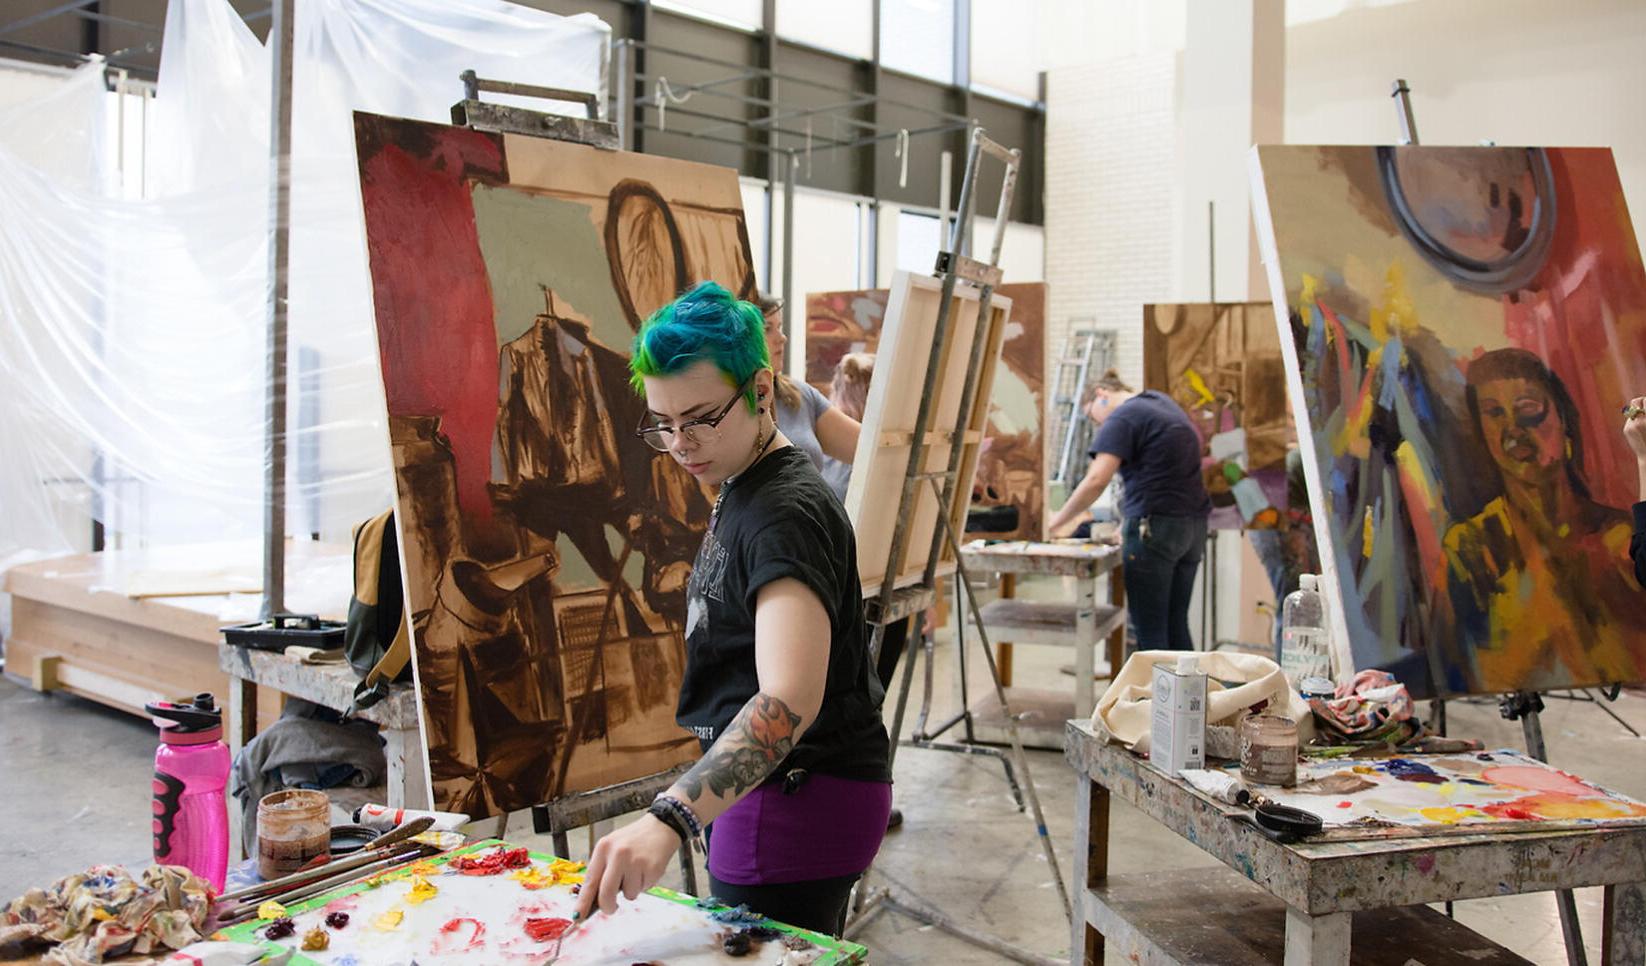 Students working in the painting studio